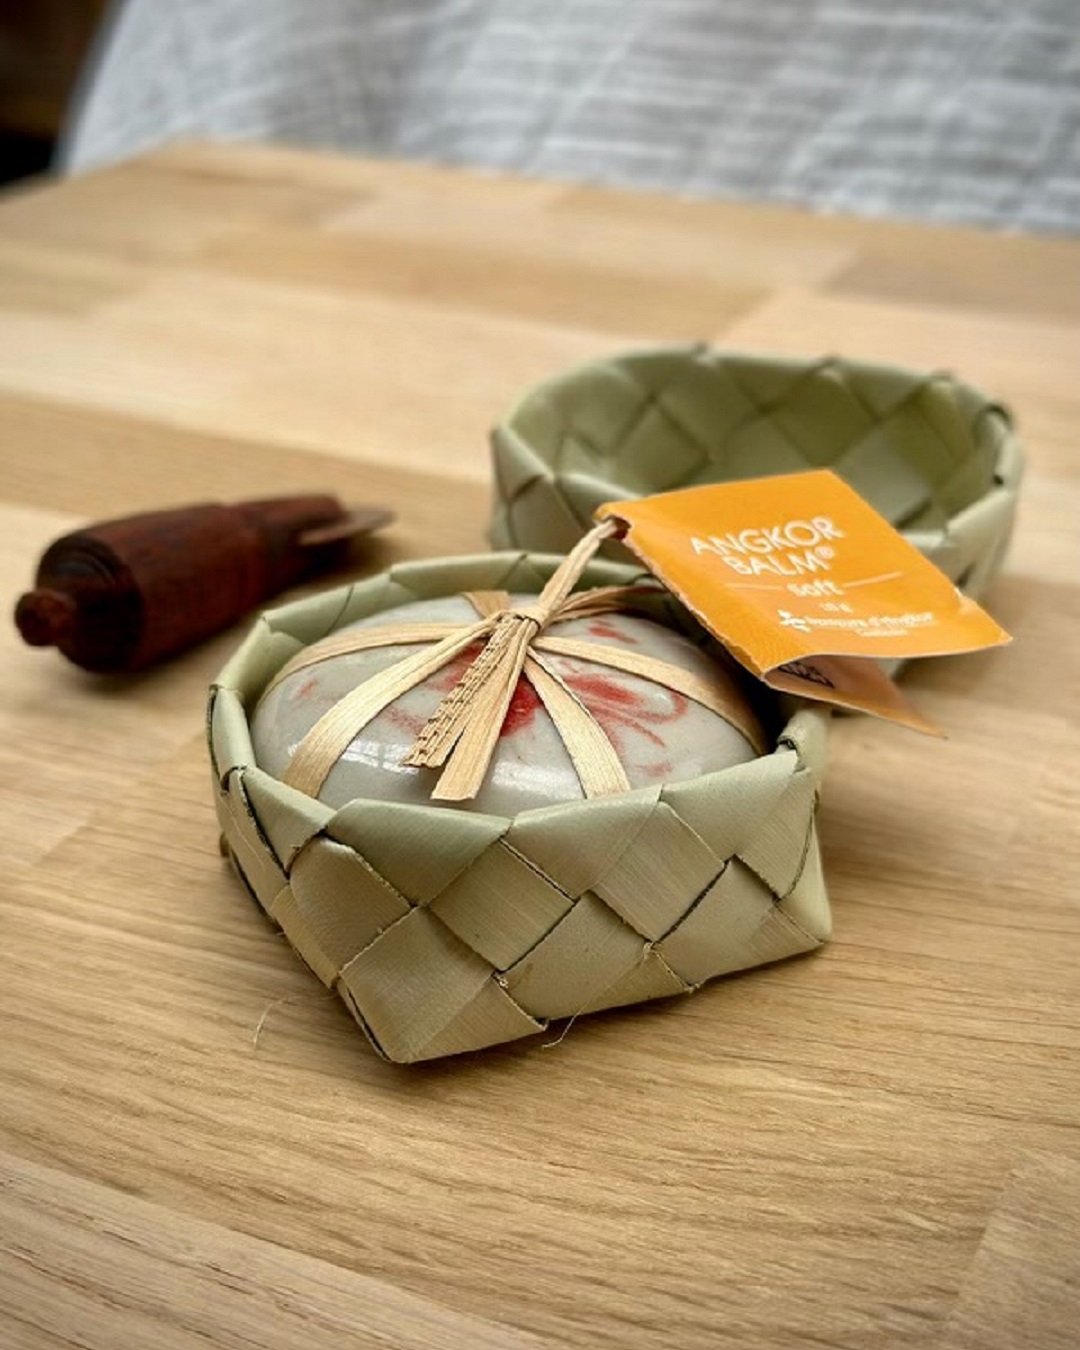 Tiger balm with wooden tool and weaved flax basket on wooden table